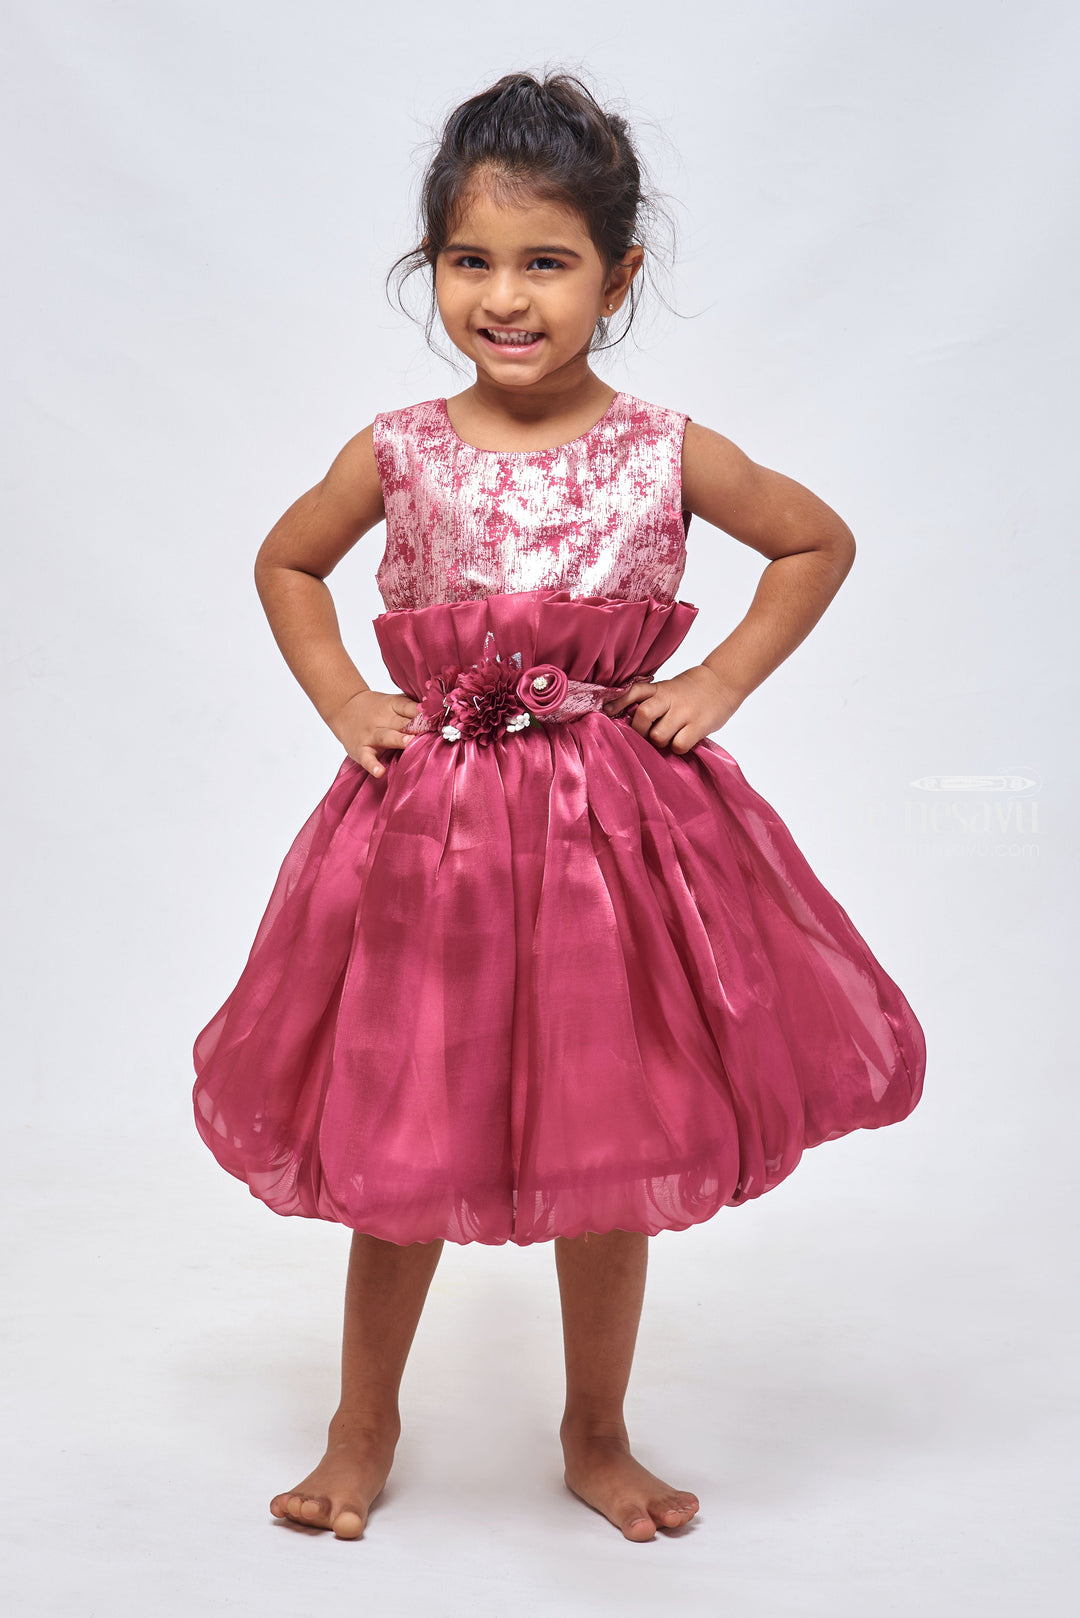 The Nesavu Girls Fancy Party Frock Ruby Radiance: Designer Foil-Printed Pleated Frock with Floral Applique in Organza Nesavu 18 (2Y) / Red / Organza PF148B-18 Mermaid Birthday Outfits: Trendy & Stylish Floral Embellished Baby Girl Frocks | The Nesavu